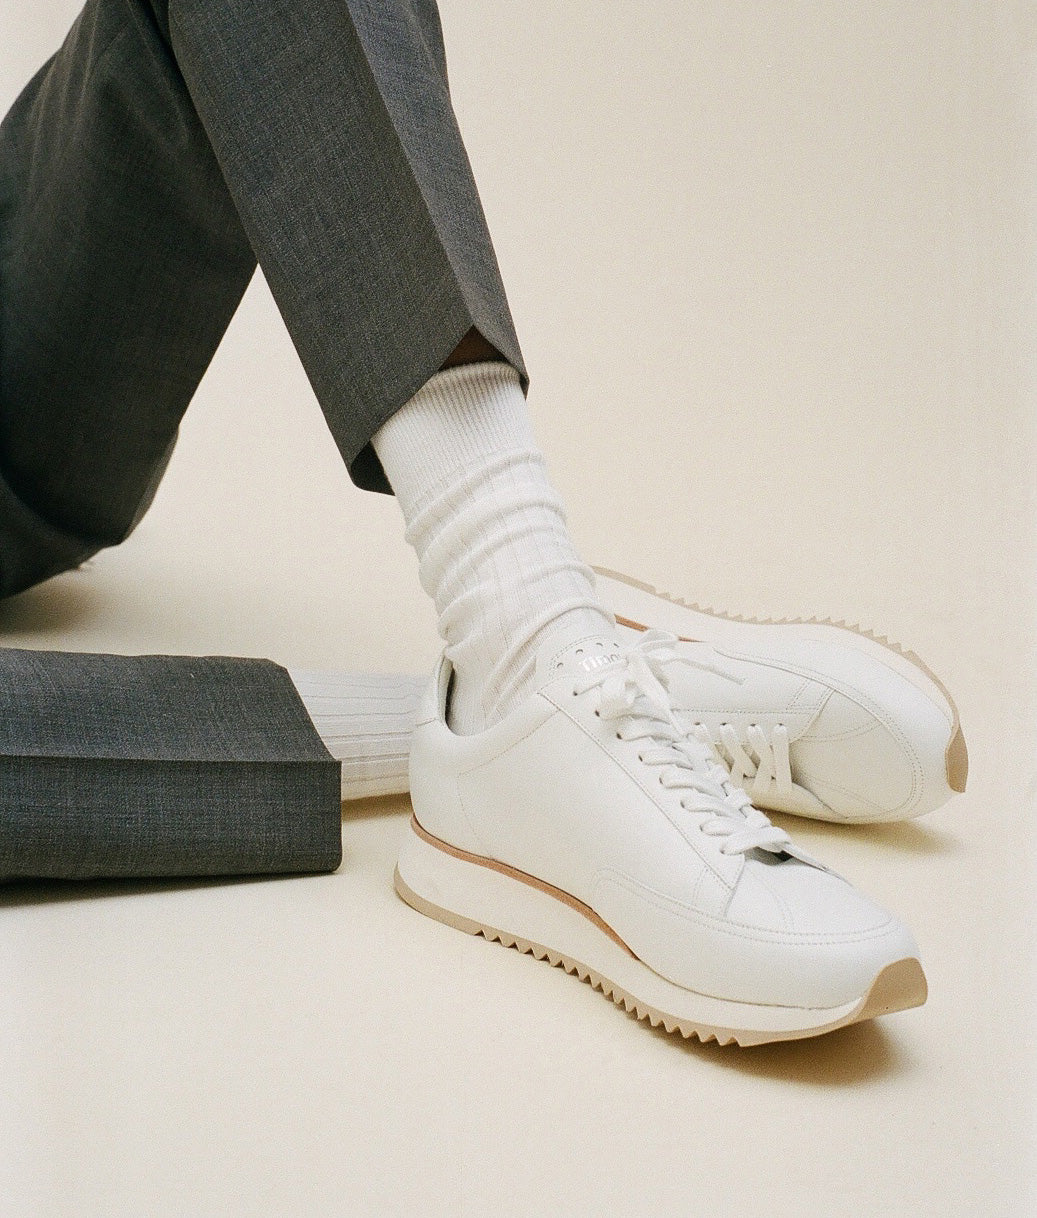 Timothee paris sneaker cabourg white worn with grey trousers 